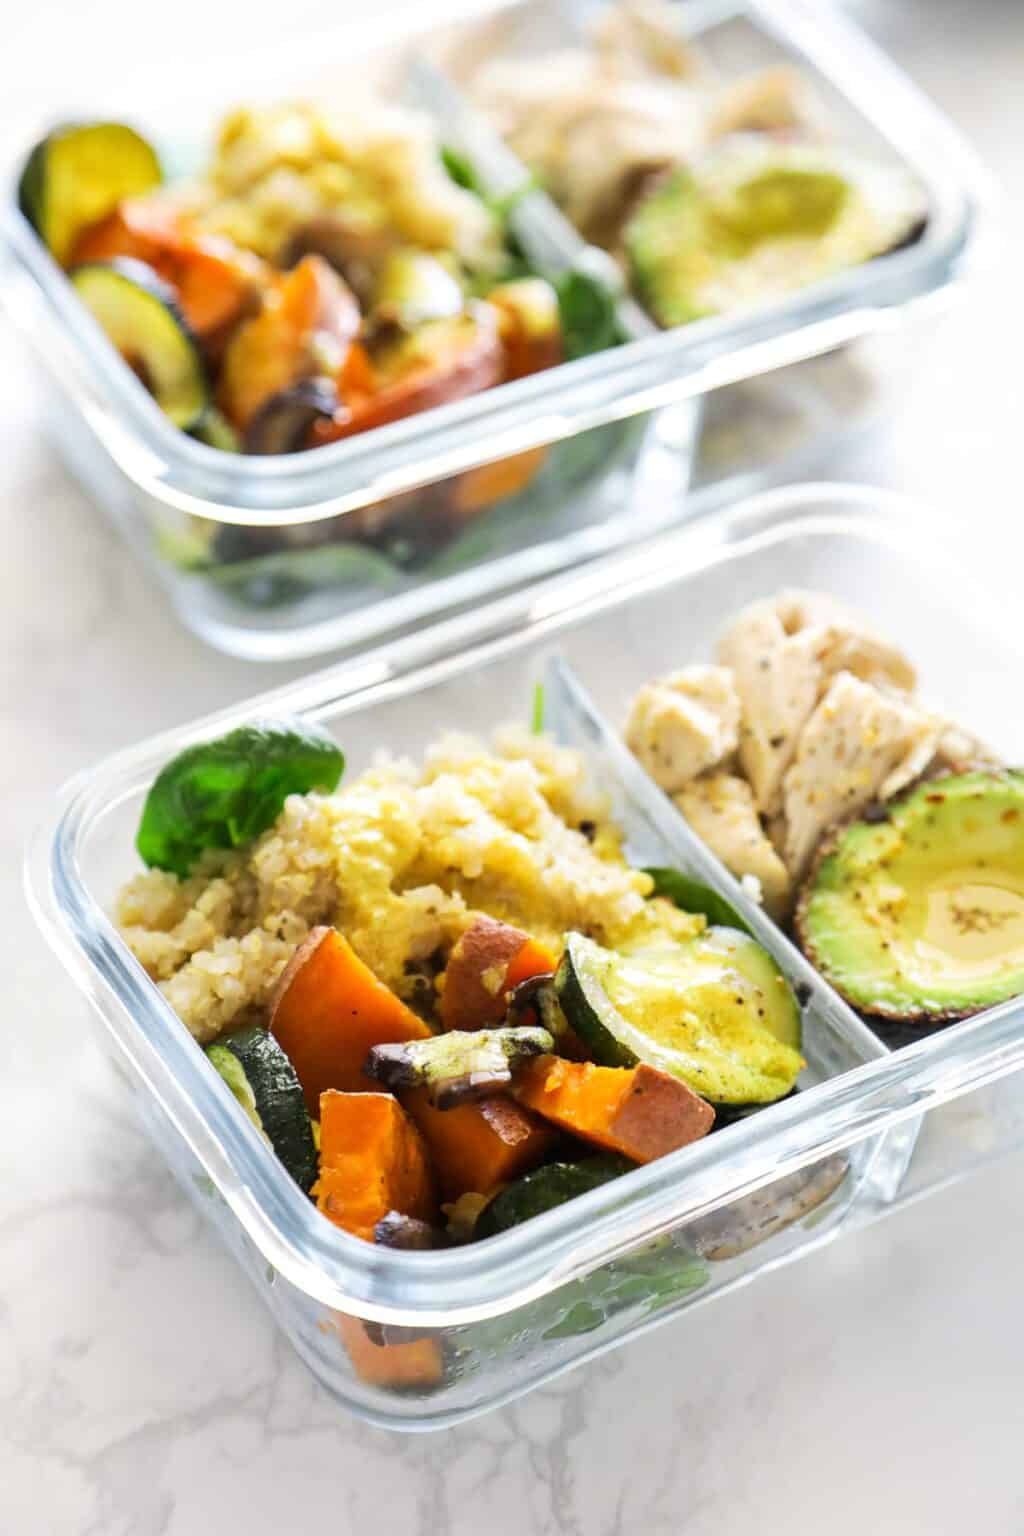 High Protein Meal Prep Recipes